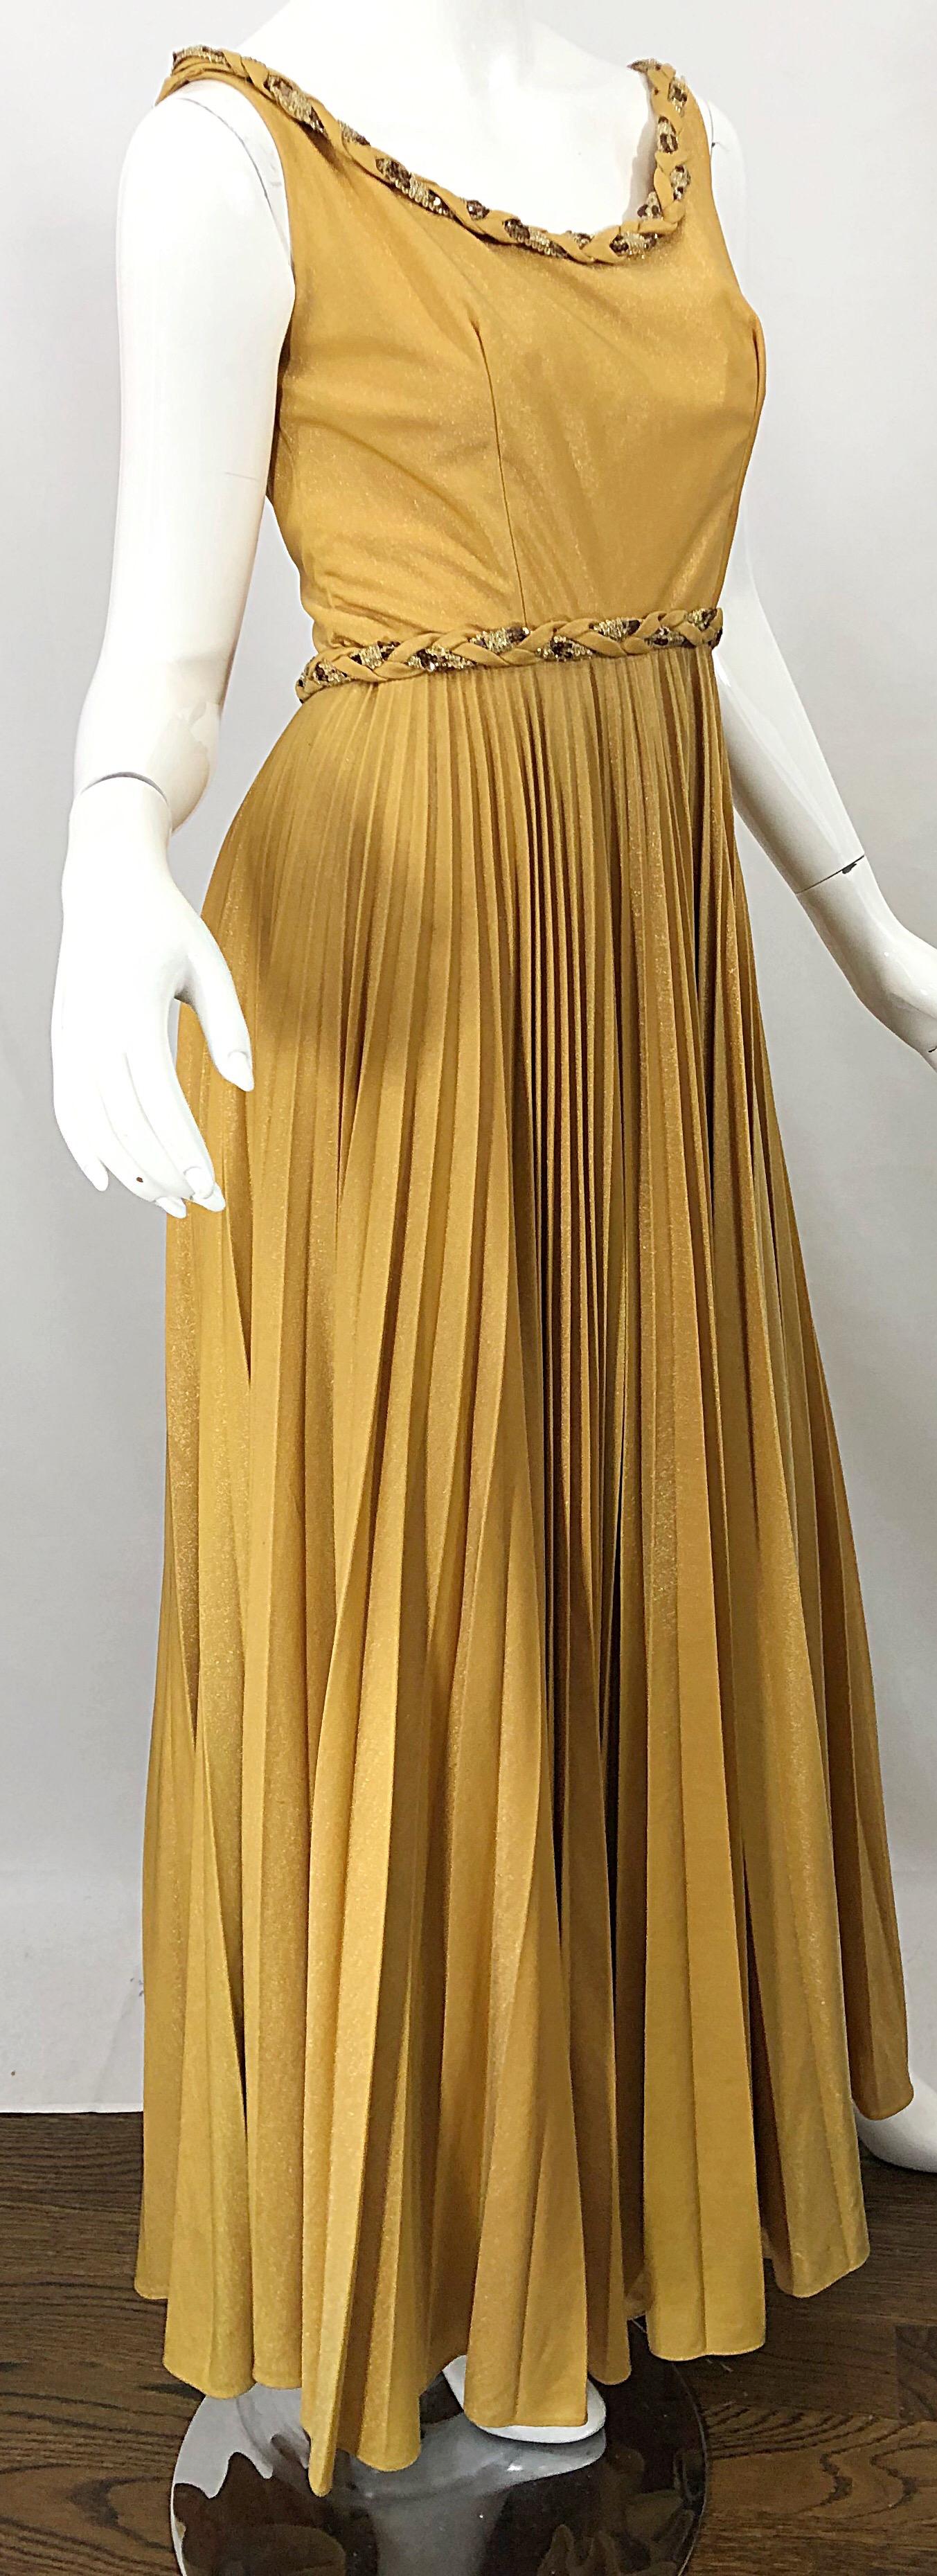 Brown Emma Domb 1970s Gold Metallic Jersey Grecian Style Sequined Vintage 70s Gown For Sale